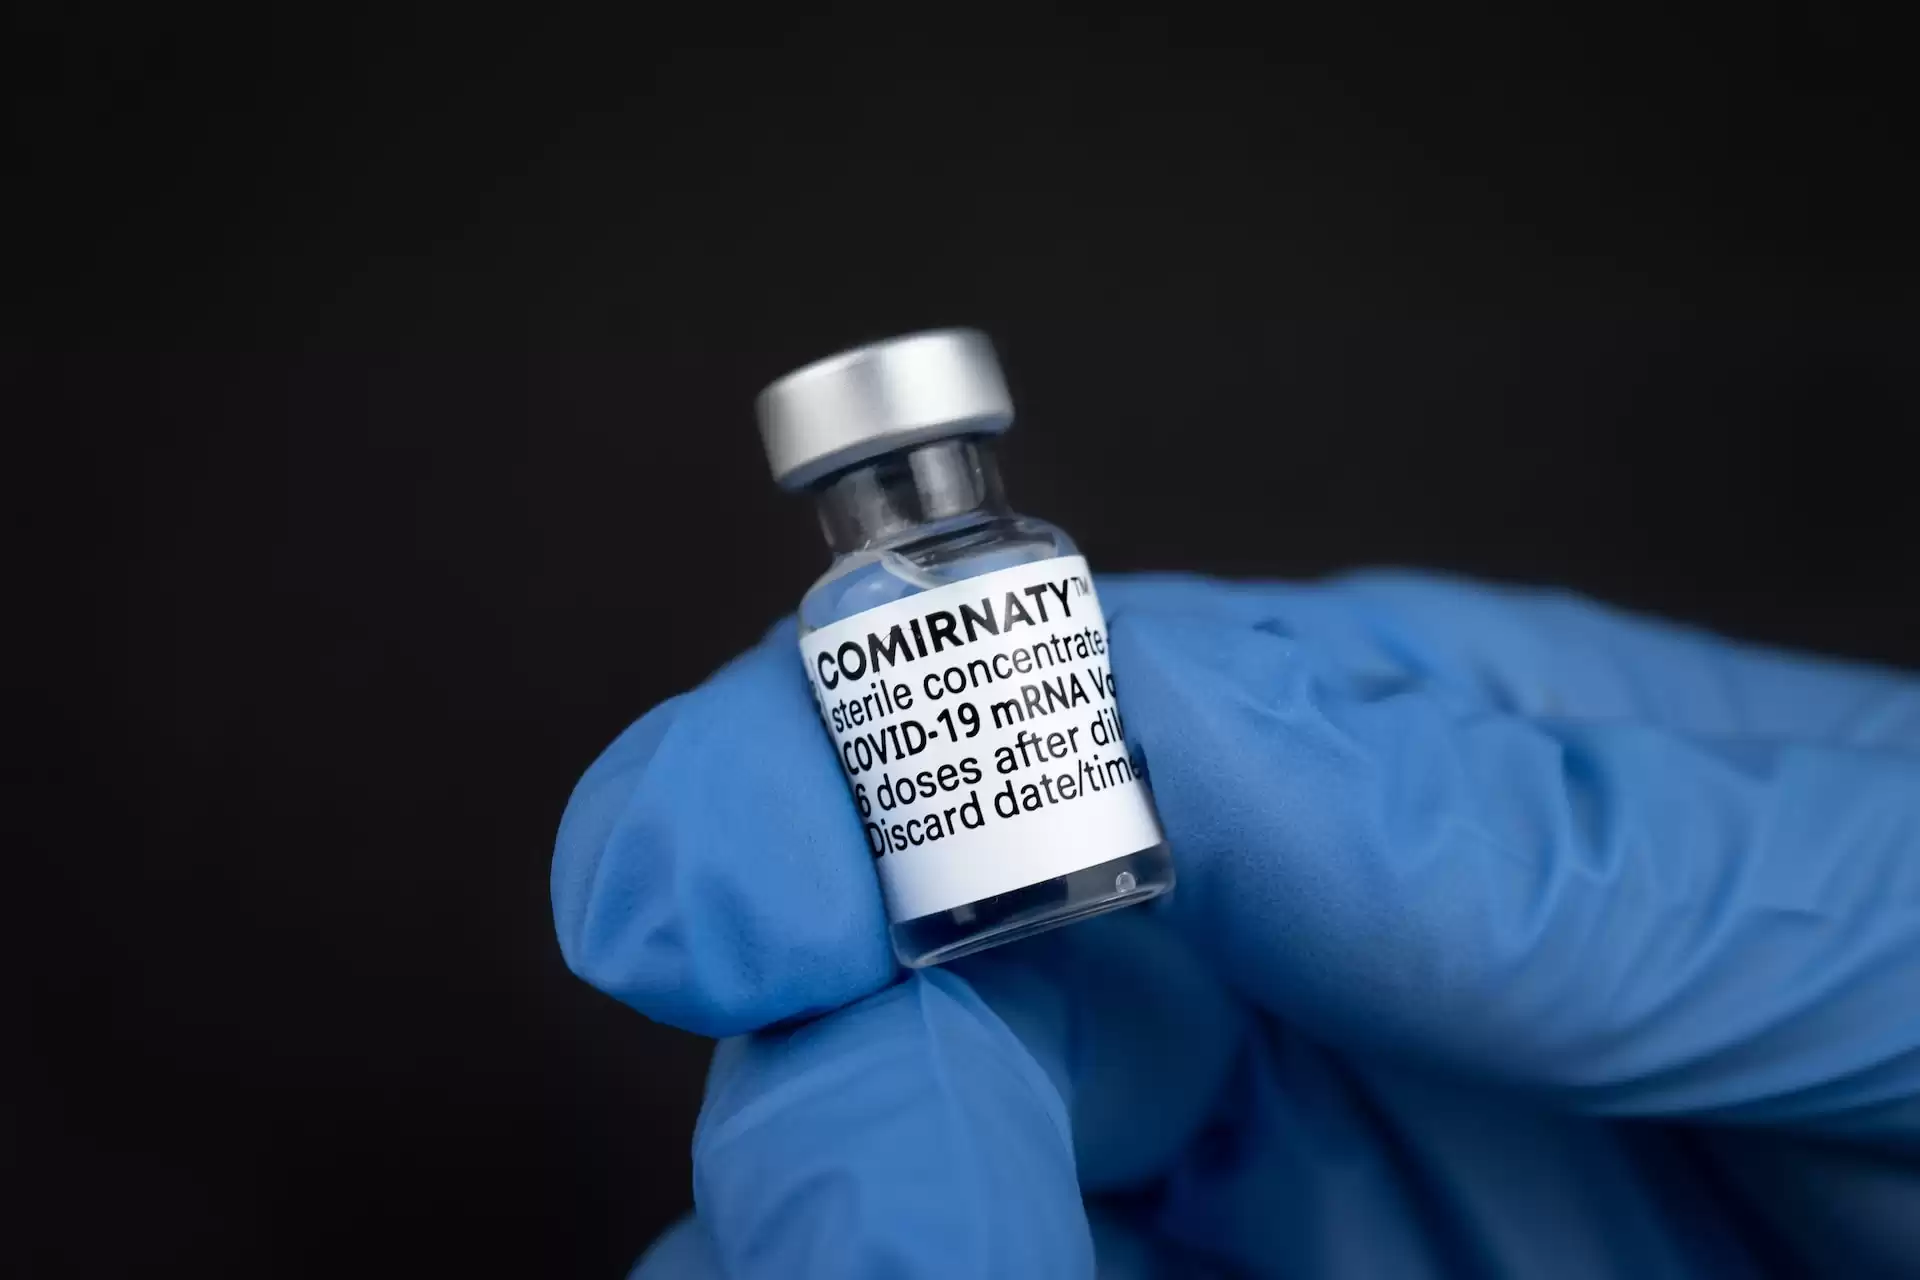 A small vial containing the COVID-19 vaccine